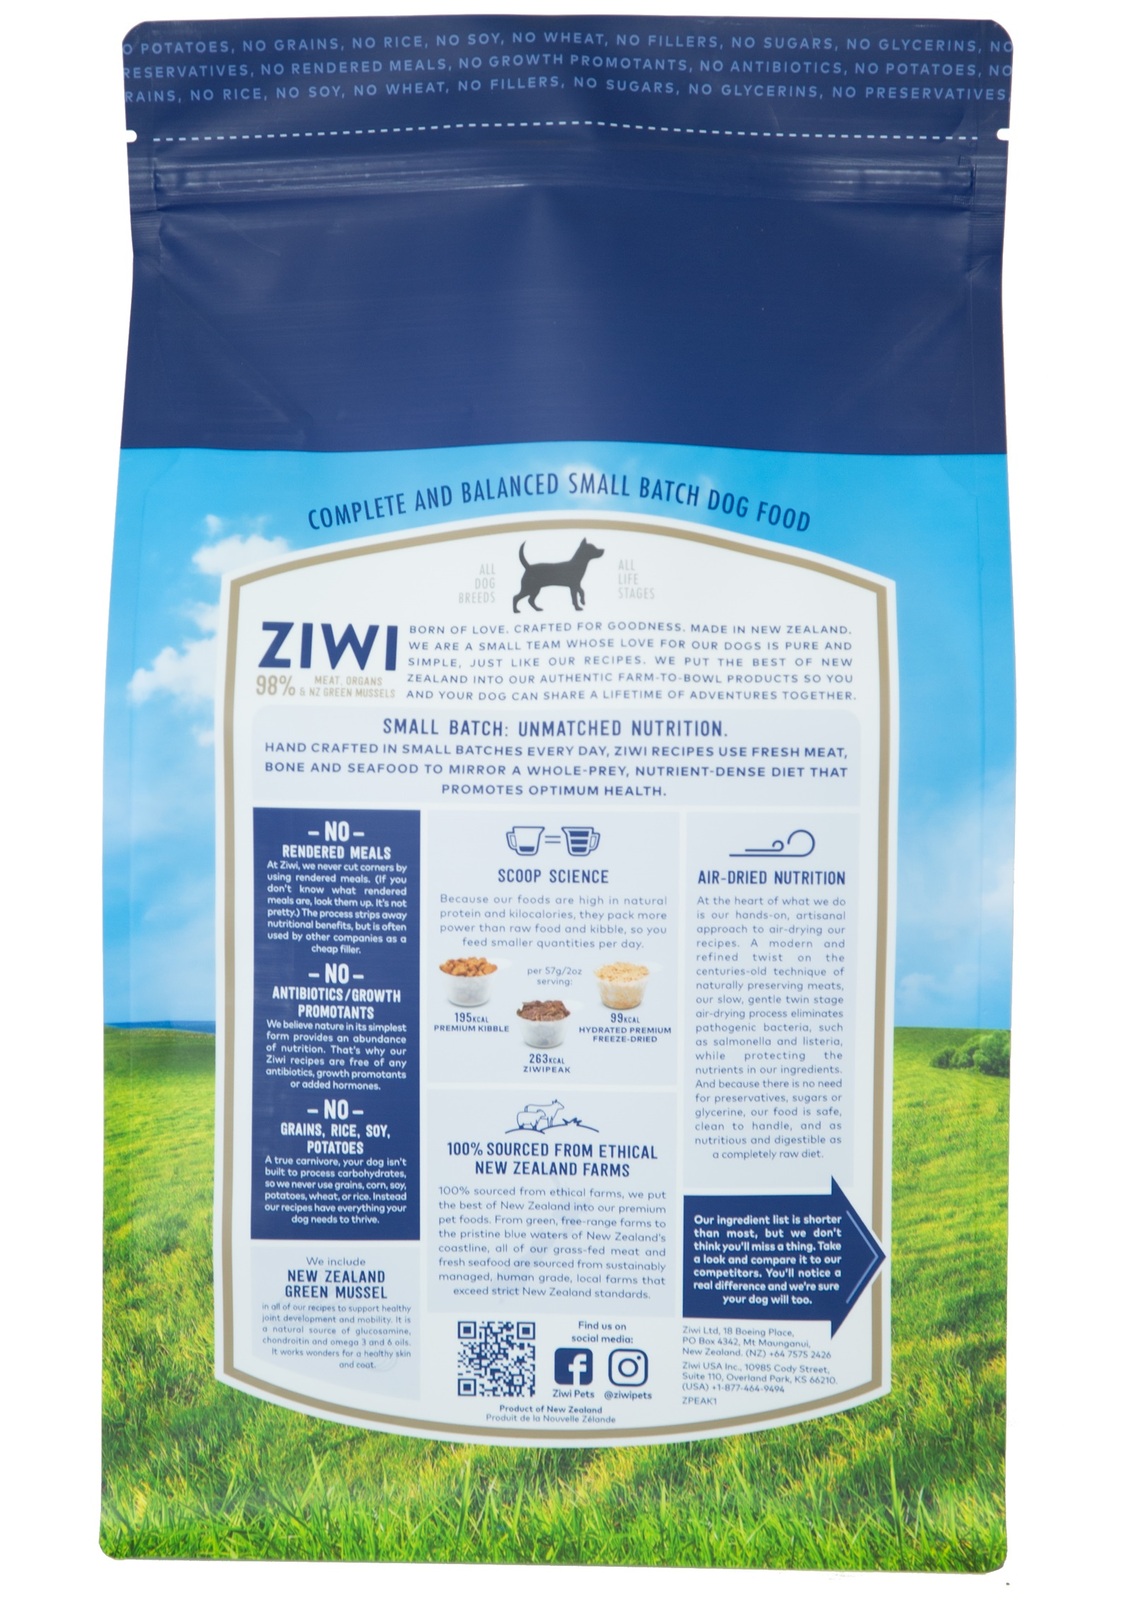 Ziwi Peak Air Dired Dog Food 1kg Pouch - Free Range Beef image 1